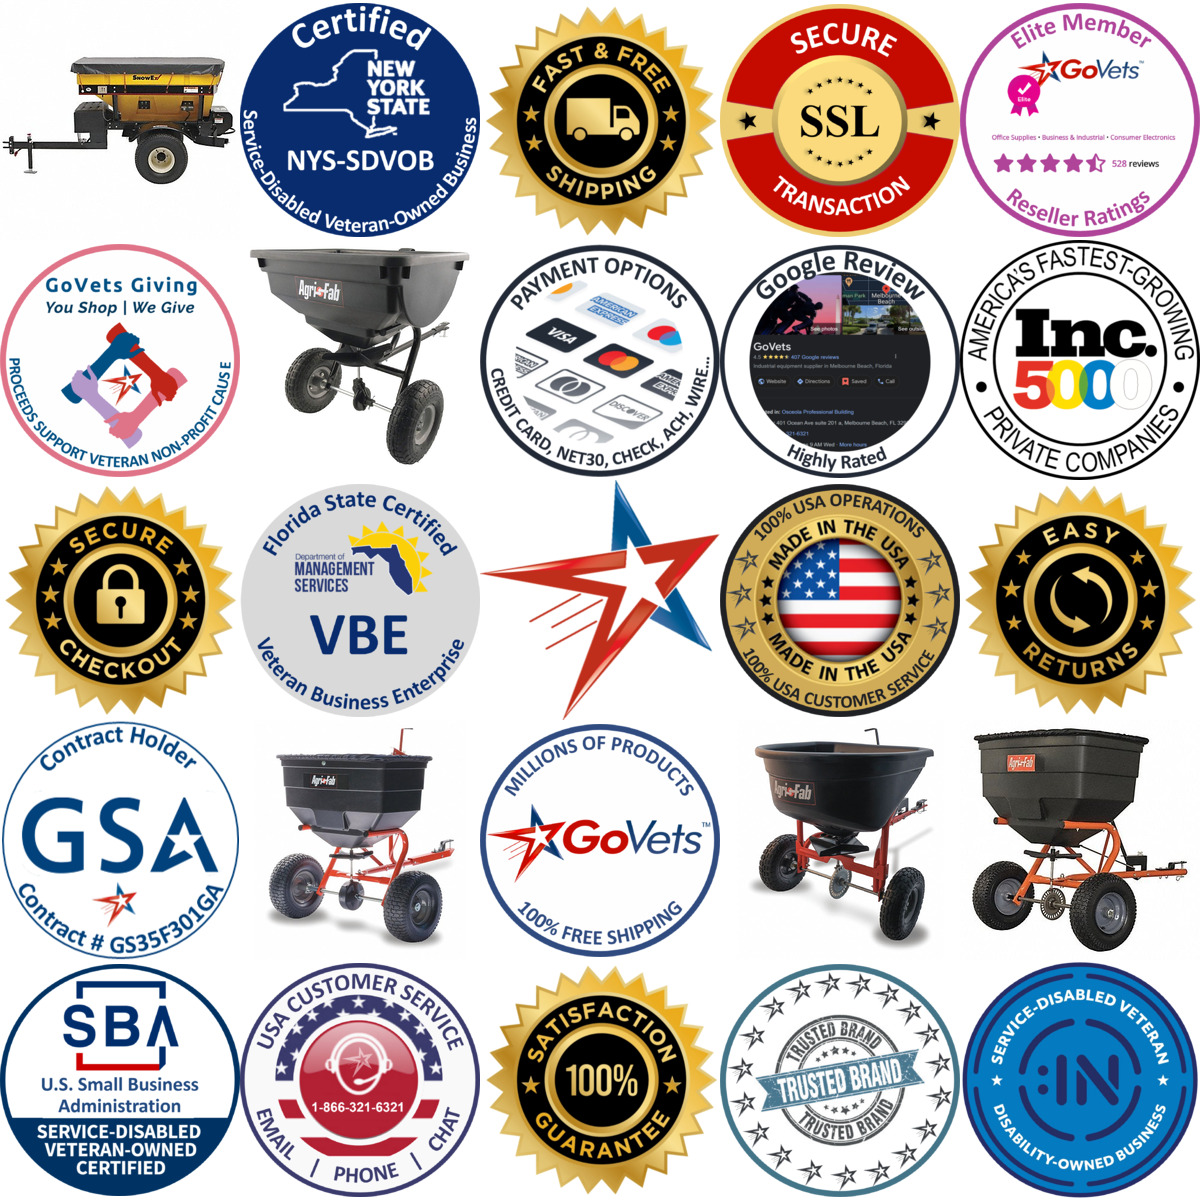 A selection of Tow Behind Spreaders products on GoVets